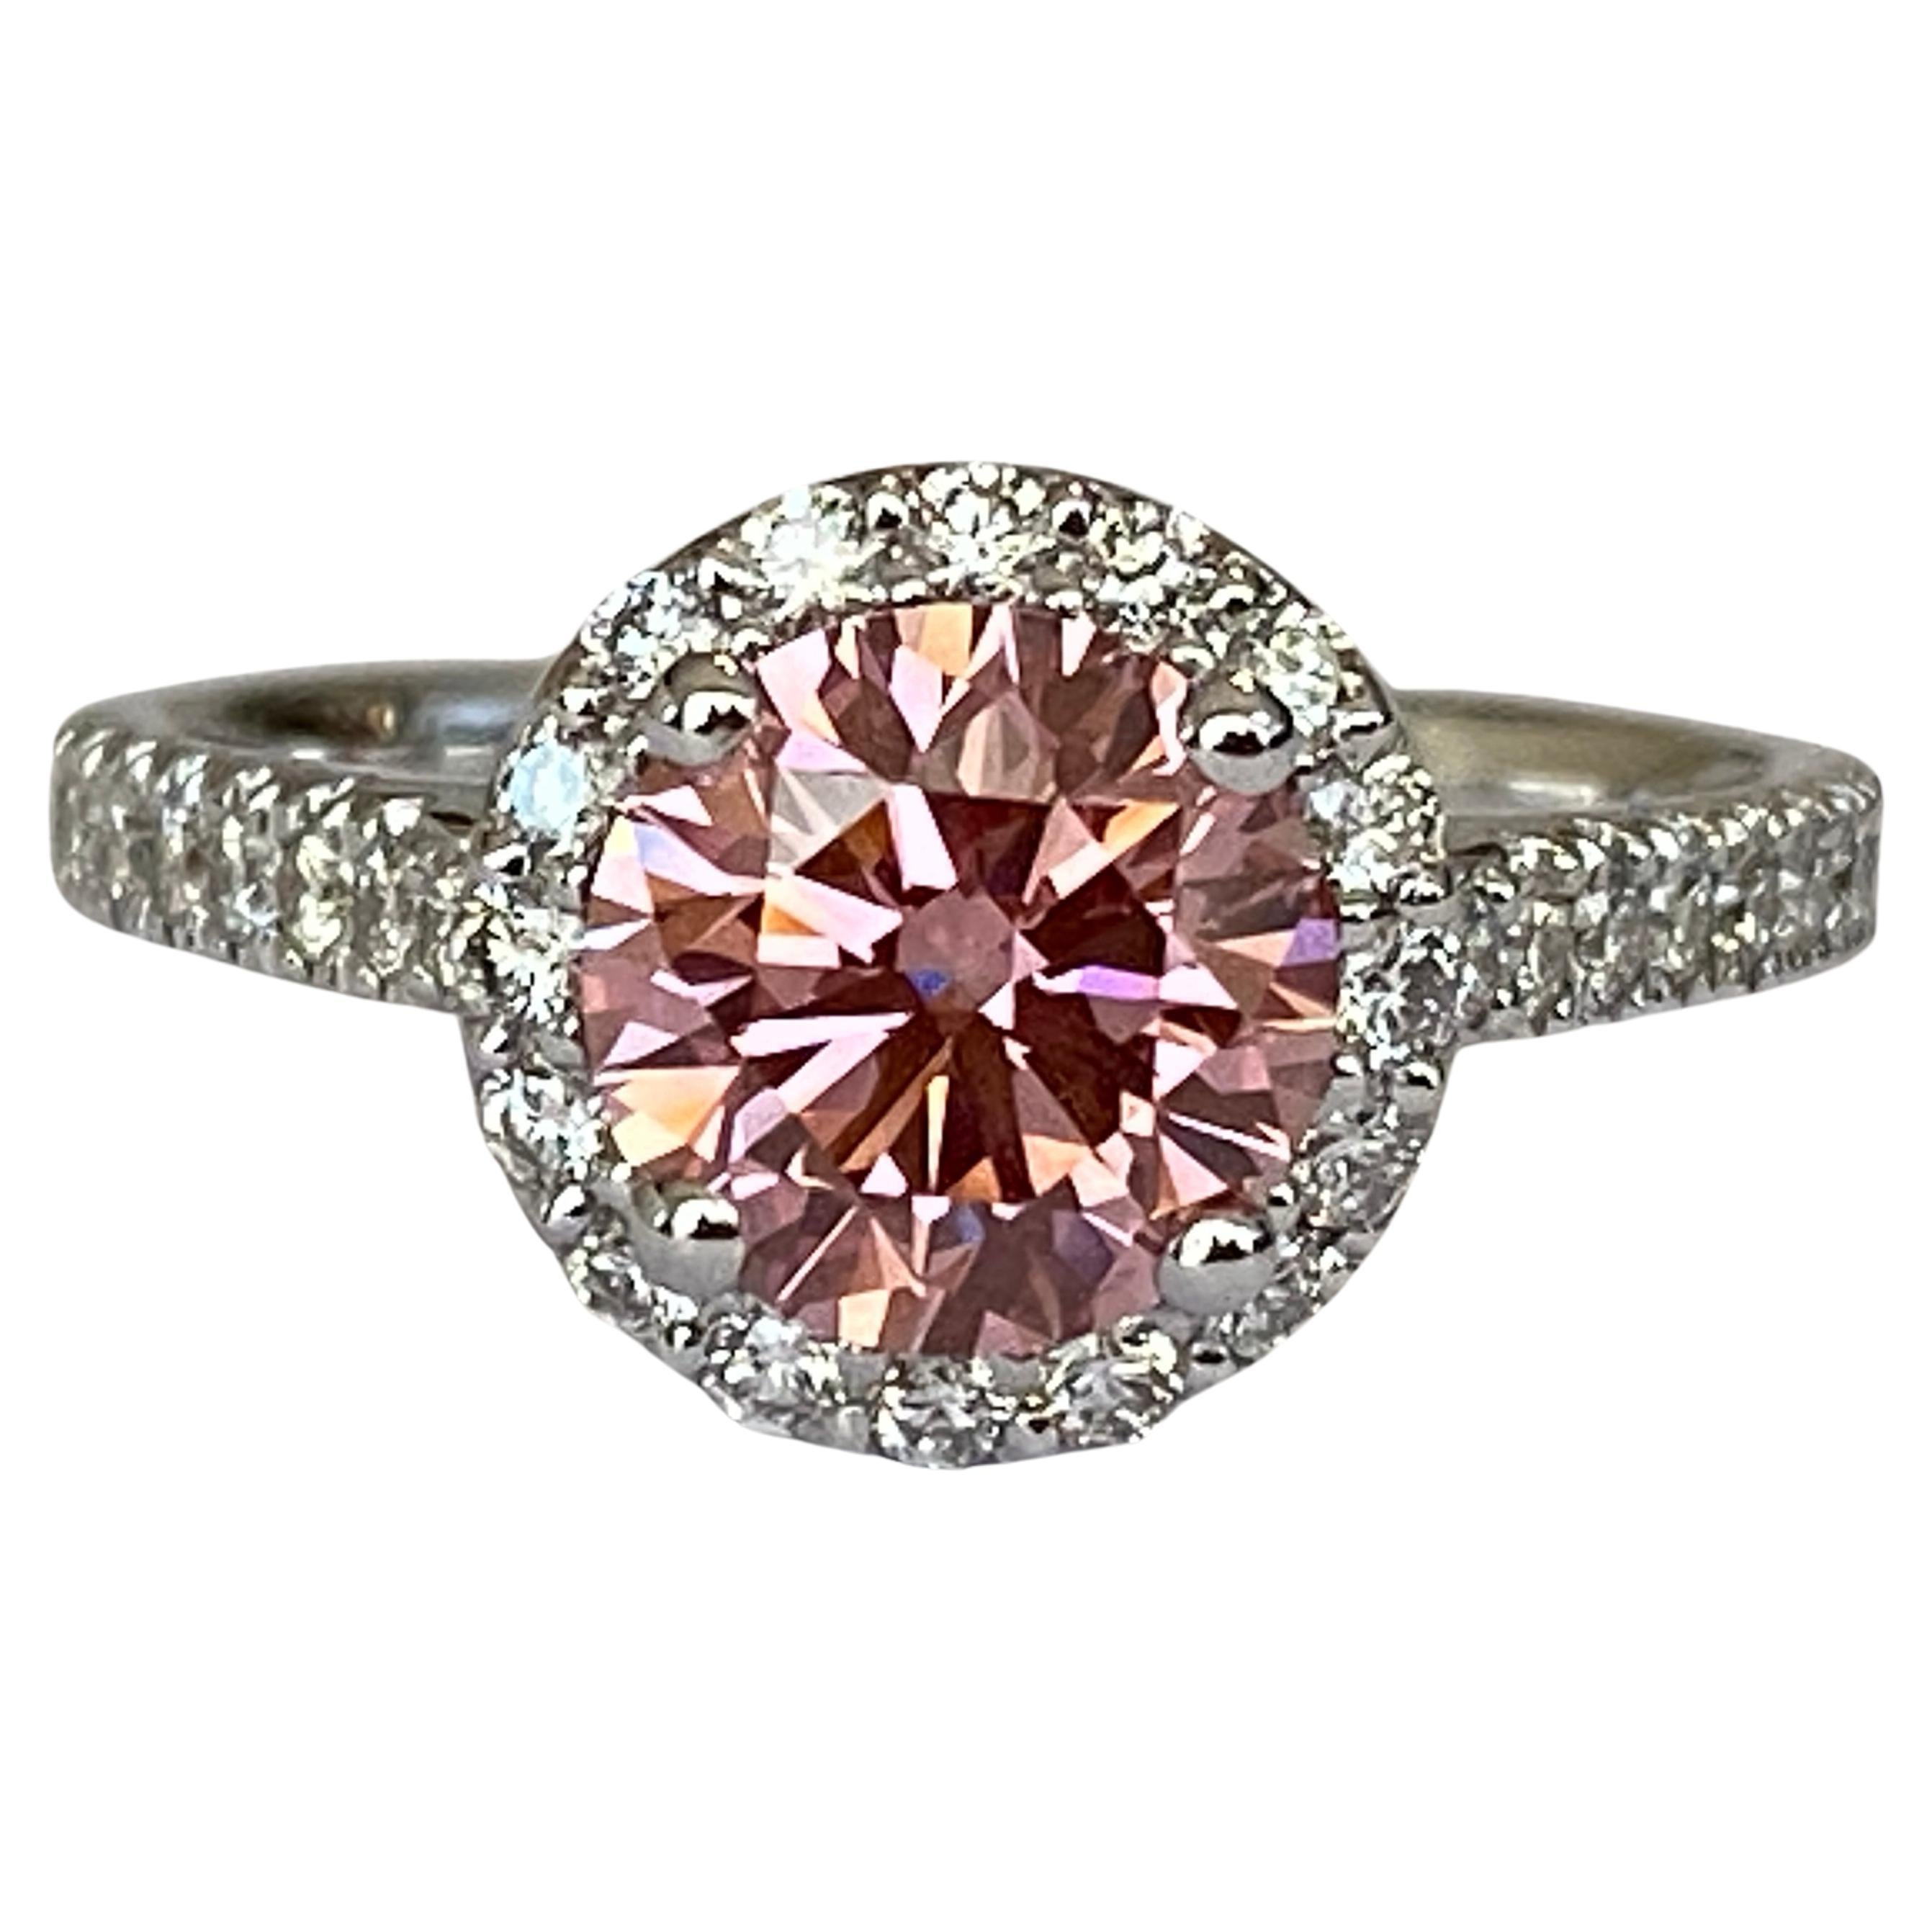 IGI Certified Diamond Engagement Ring VS1 1.51crt Pink Lab Created, 18 kt Gold For Sale